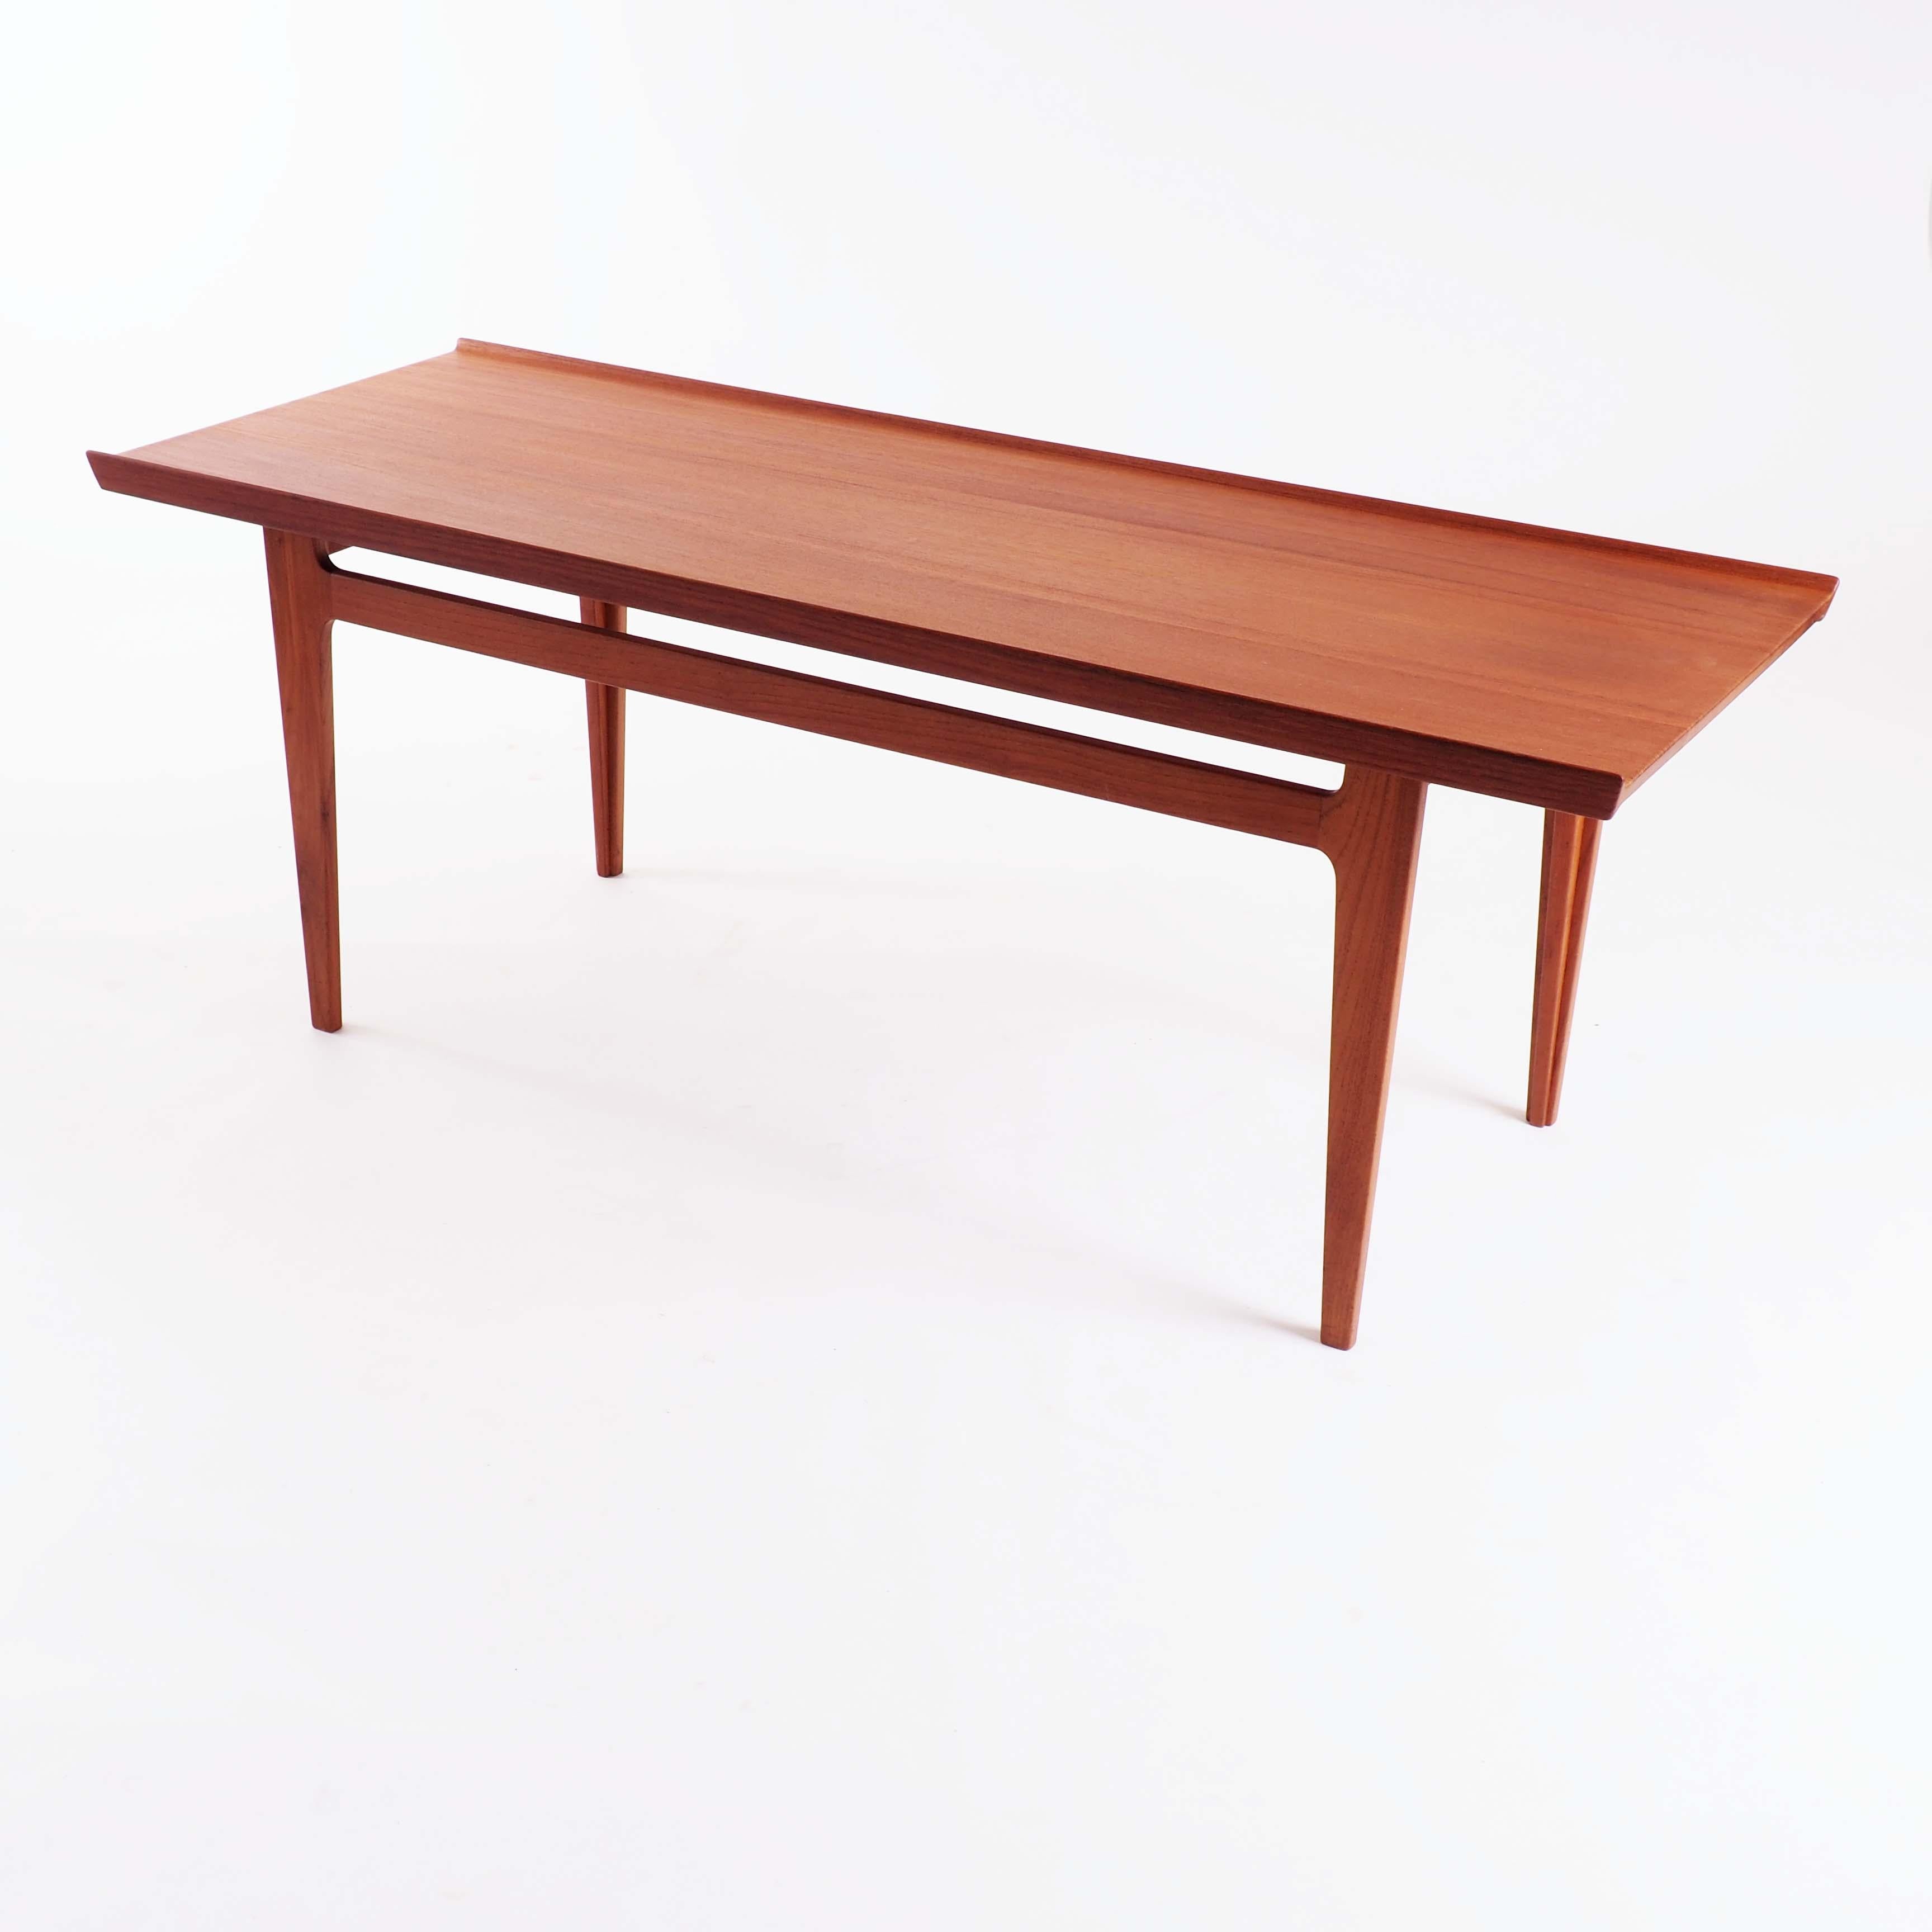 This coffee table in solid teak was designed by Finn Juhl for the Danish firm France & Son in 1959. A smaller version of this design is represented in Finn Juhls own house, now a museum.
 